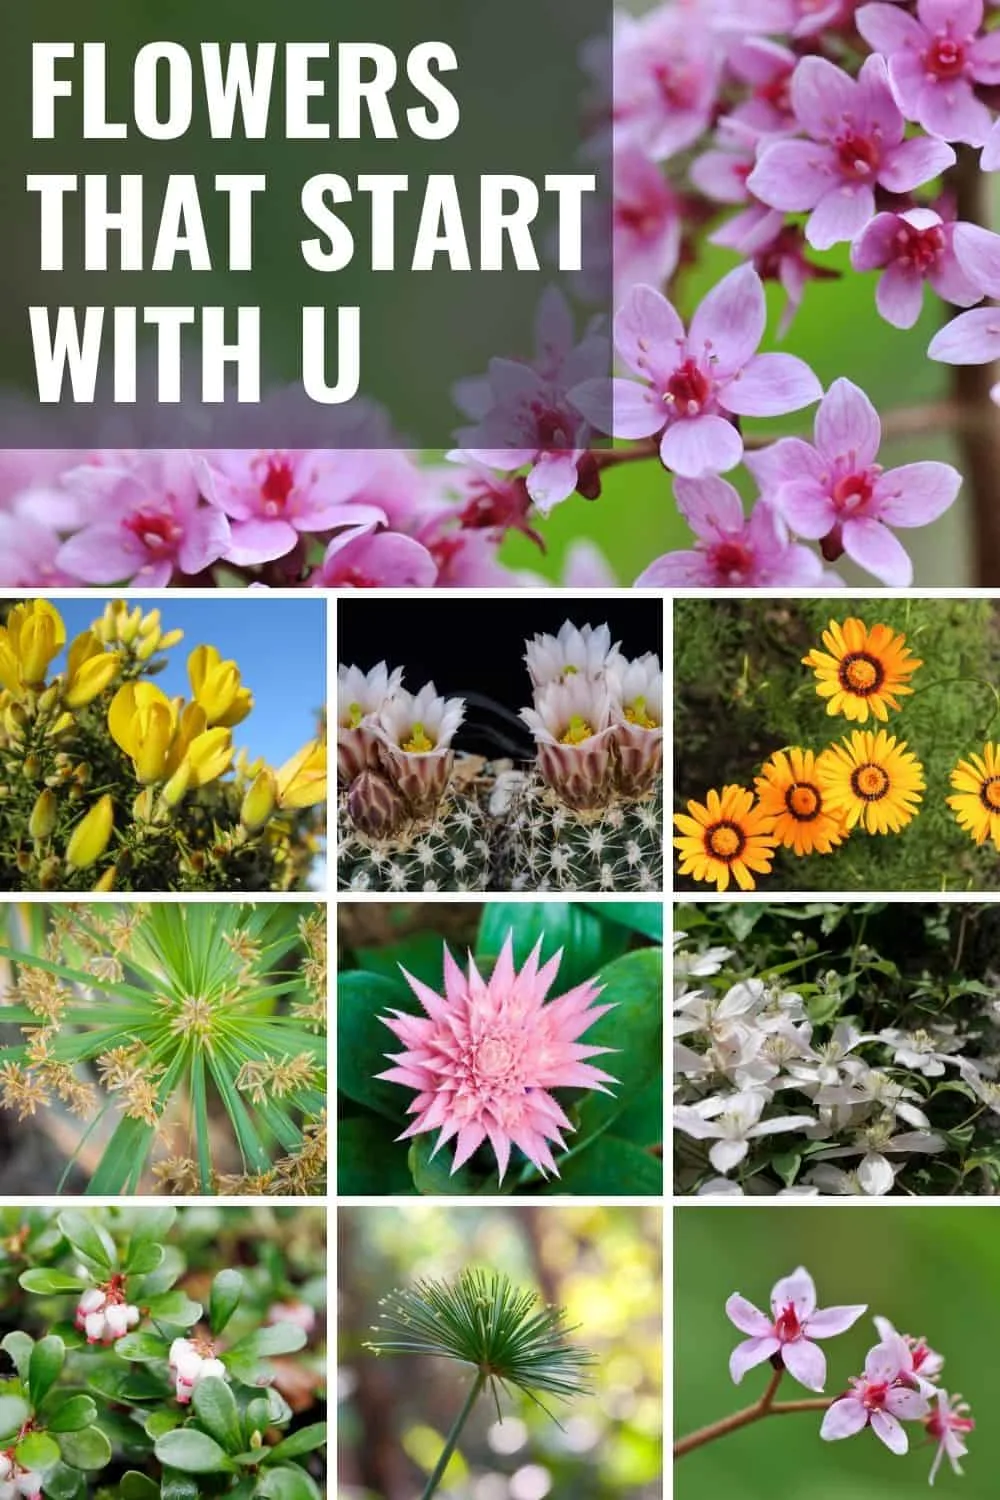 Flowers that start with u